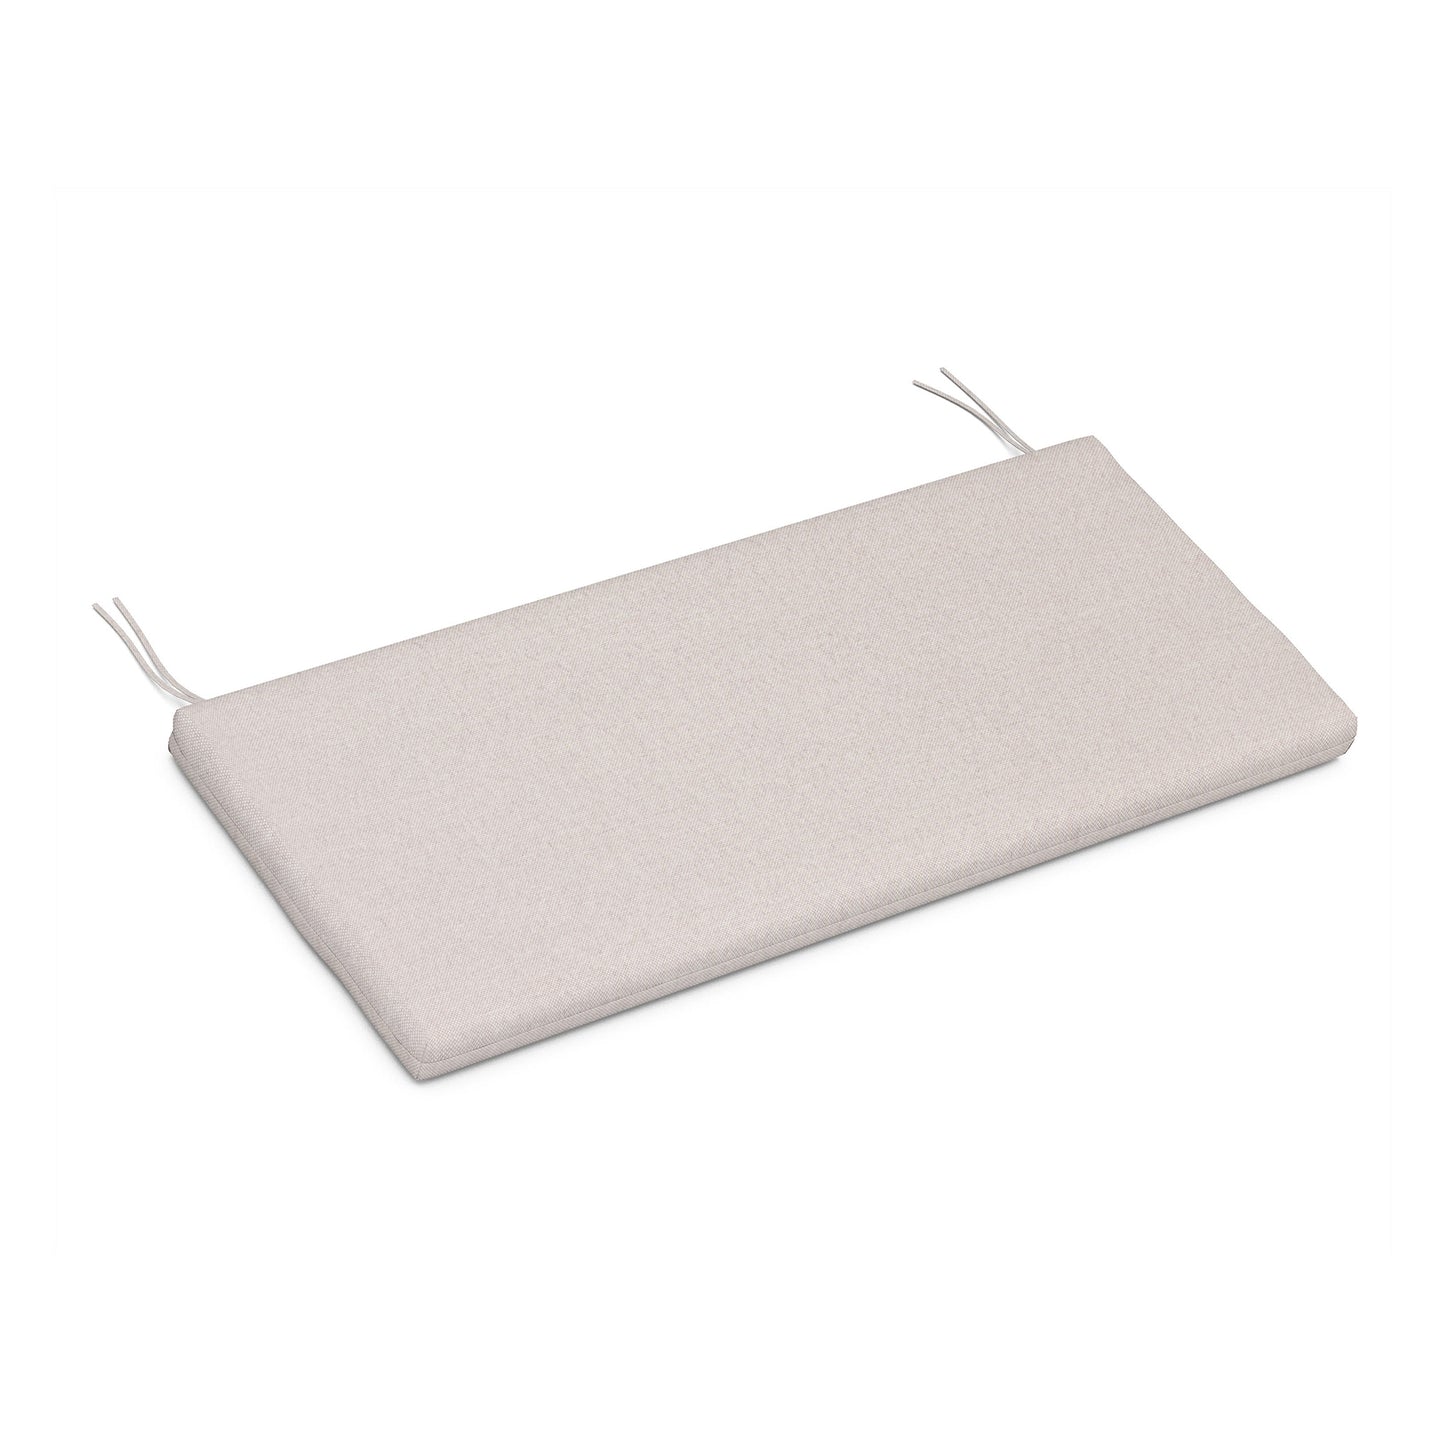 A rectangular outdoor bench cushion in light beige with tie strings at the ends, crafted from weather-resistant upholstery fabric, displayed on a white background. XPWS0012 - Seat Cushion by POLYWOOD.